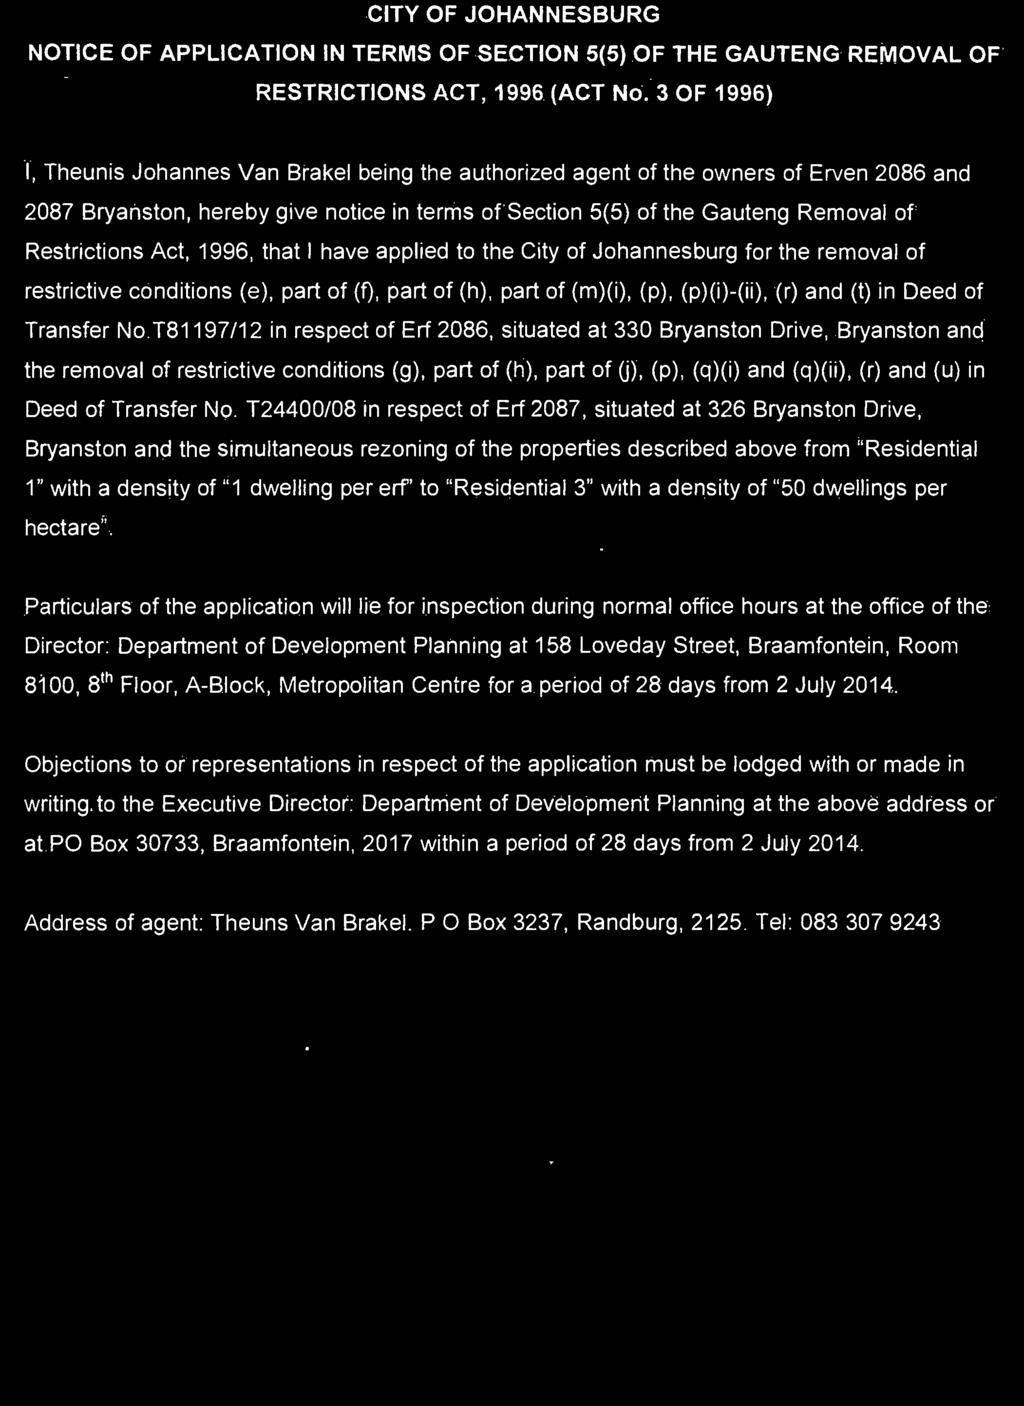 90 No. 168 PROVINCIAL GAZETTE, 2 JULY 2014 NOTICE 2042 OF 2014 CITY OF JOHANNESBURG NOTICE OF APPLICATION IN TERMS OF SECTION 5(5) OF THE GAUTENG REMOVAL OF RESTRICTIONS ACT, 1996 (ACT No.